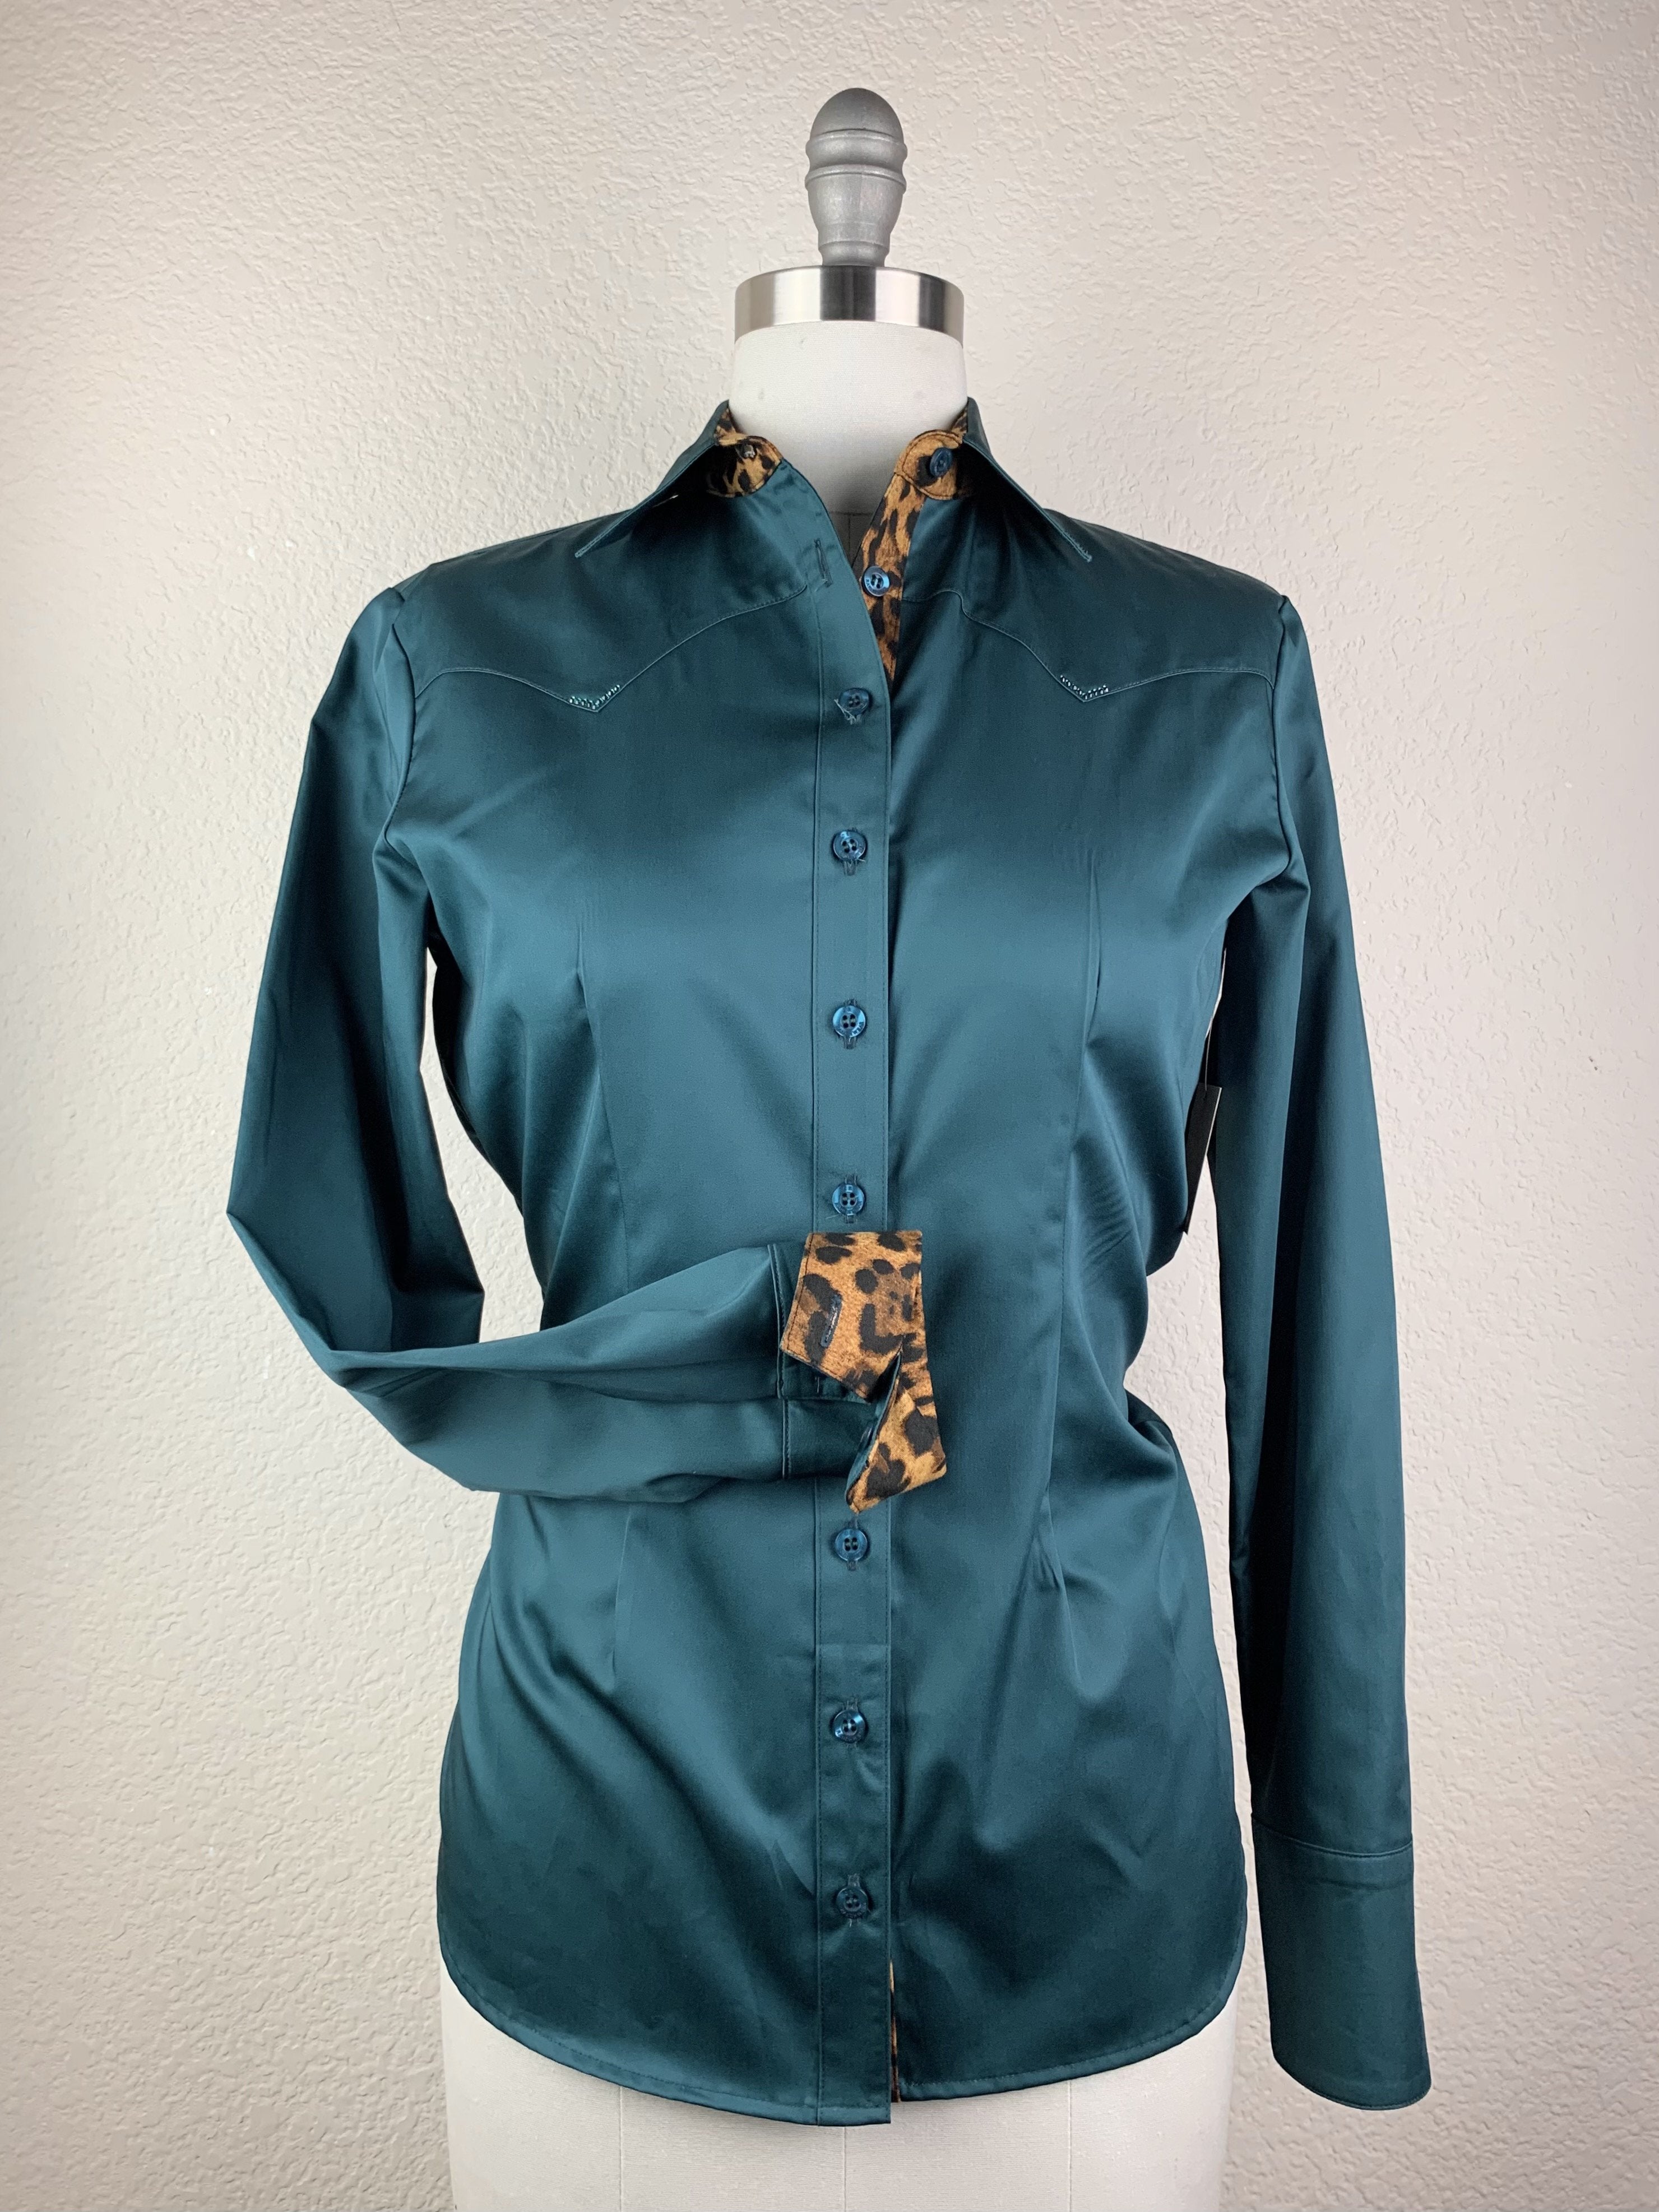 Buy CR Western Pro Wild About Leopard Teal at CR RanchWear for only $189.00